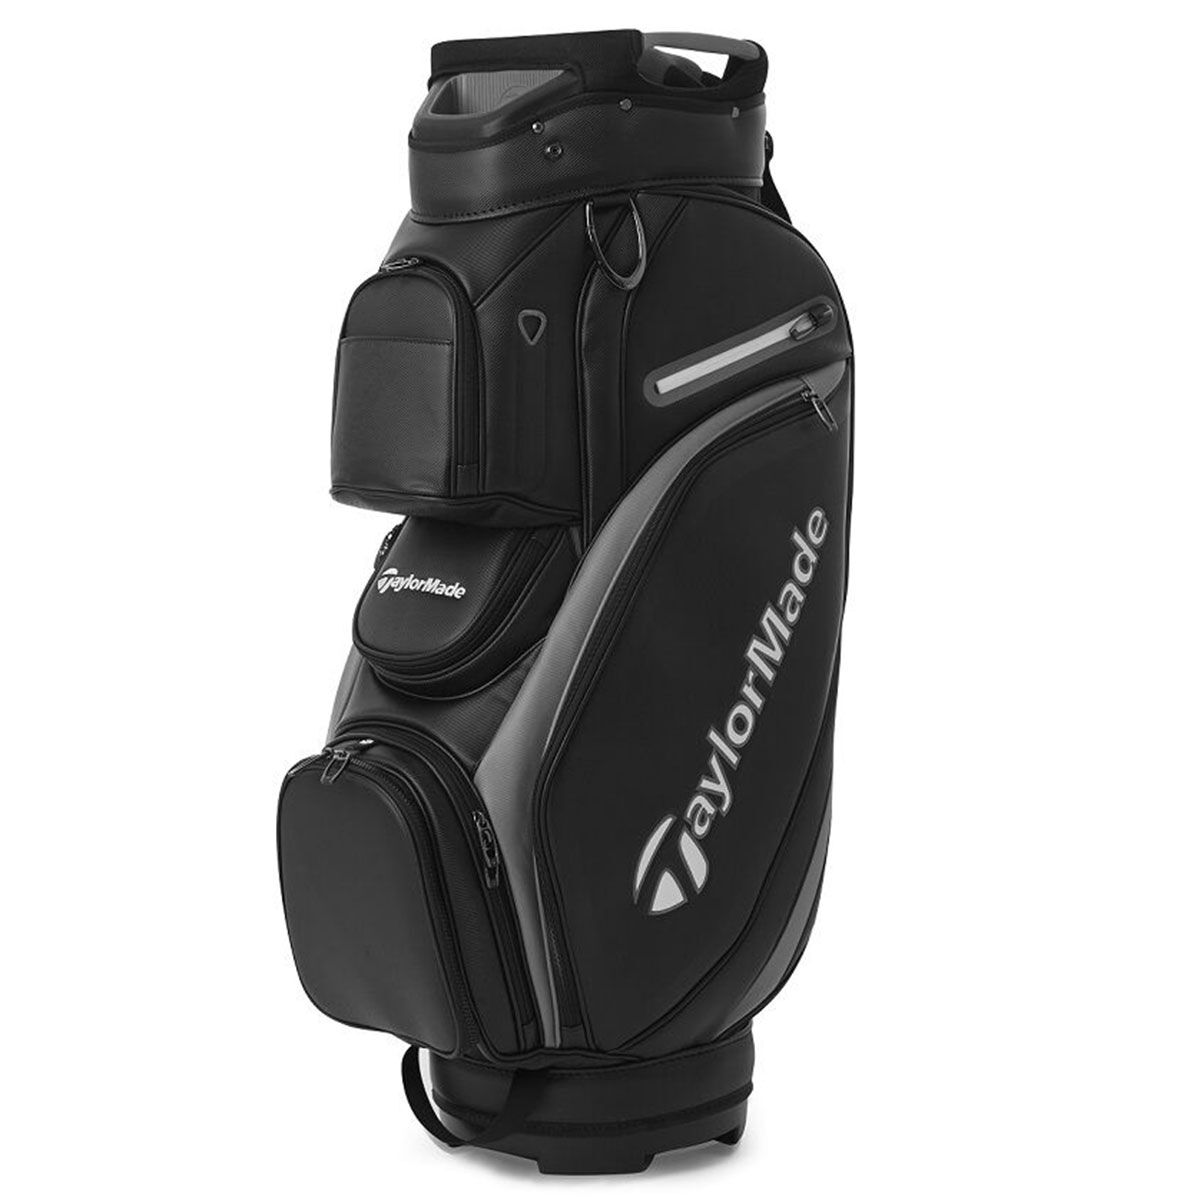 TaylorMade Deluxe Golf Cart Bag, Black/grey | American Golf von TaylorMade